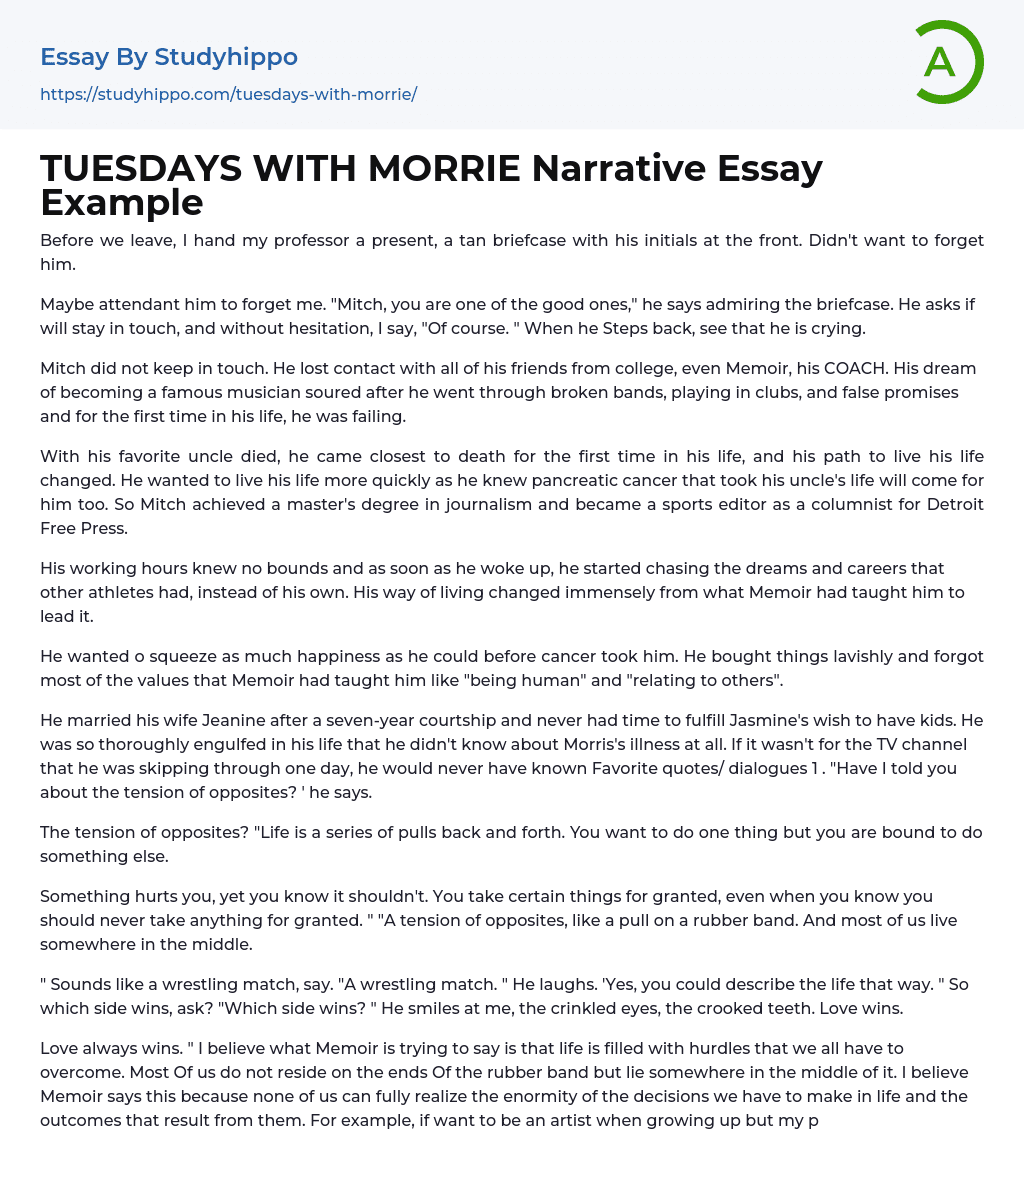 tuesdays with morrie response essay